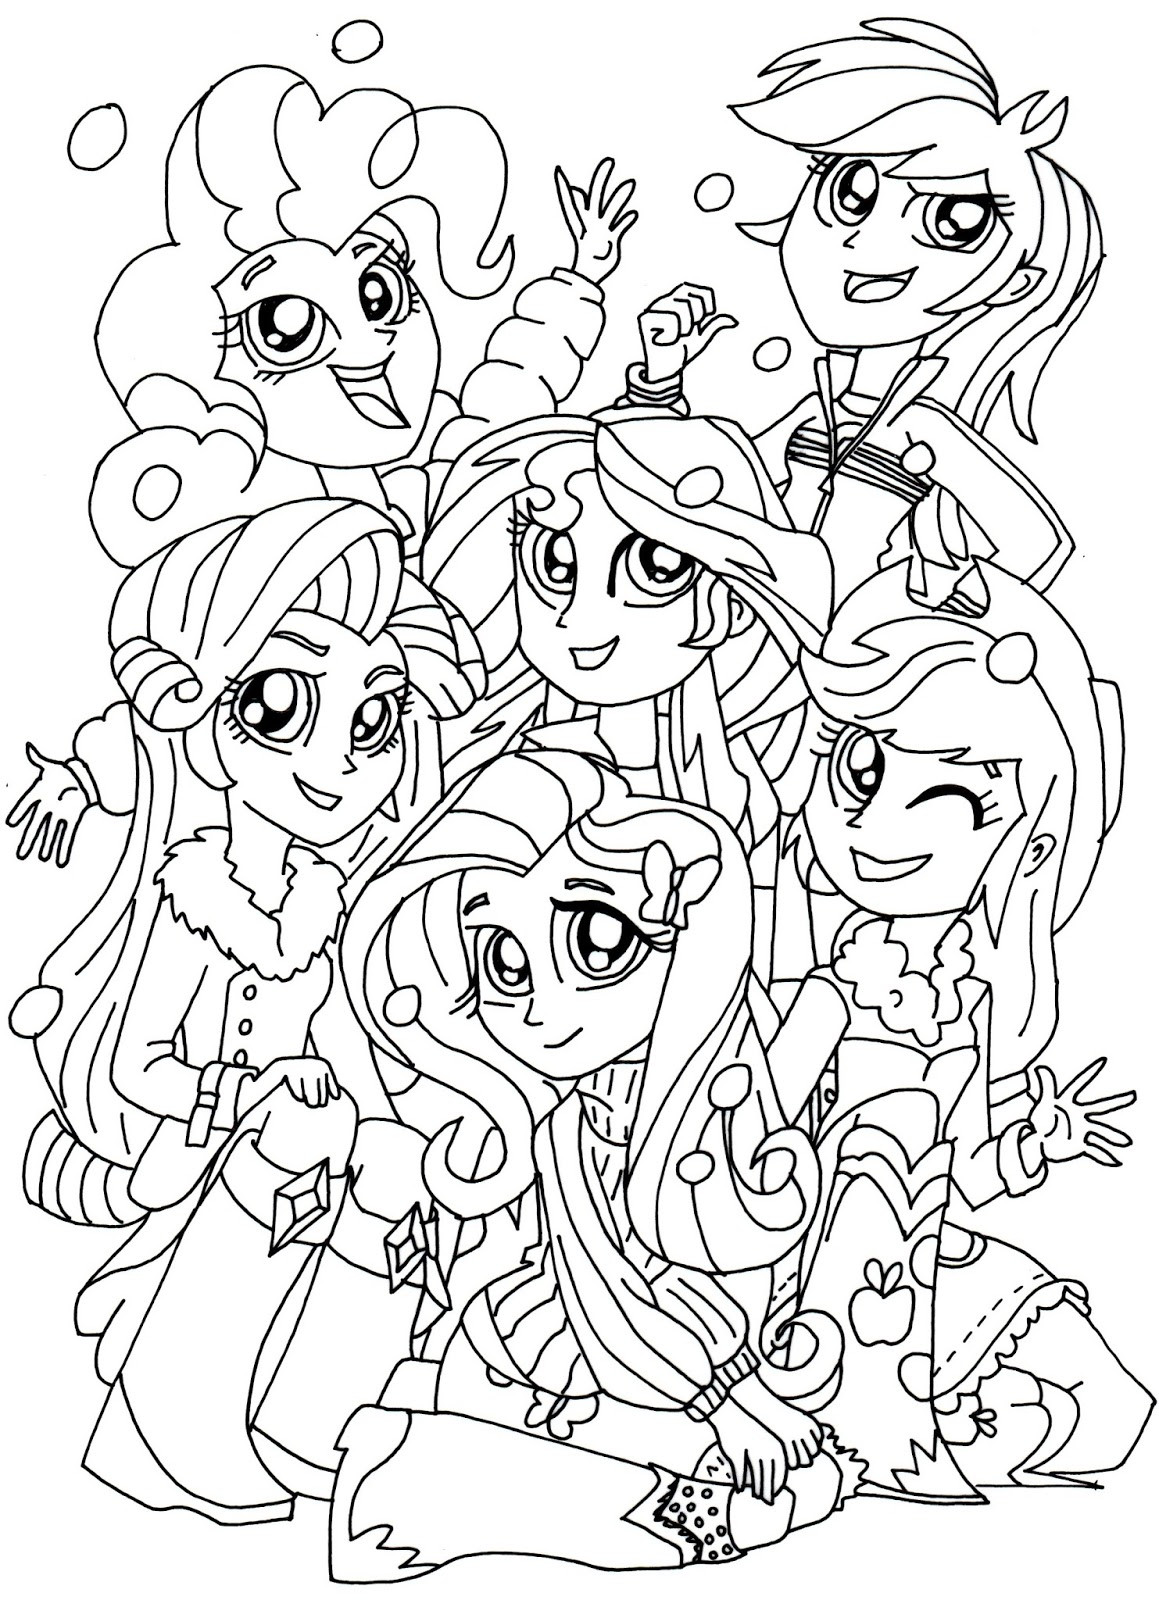 Equestria Girls Coloring Pages
 My Little Pony Equestria Girls Sunset Shimmer Coloring Page